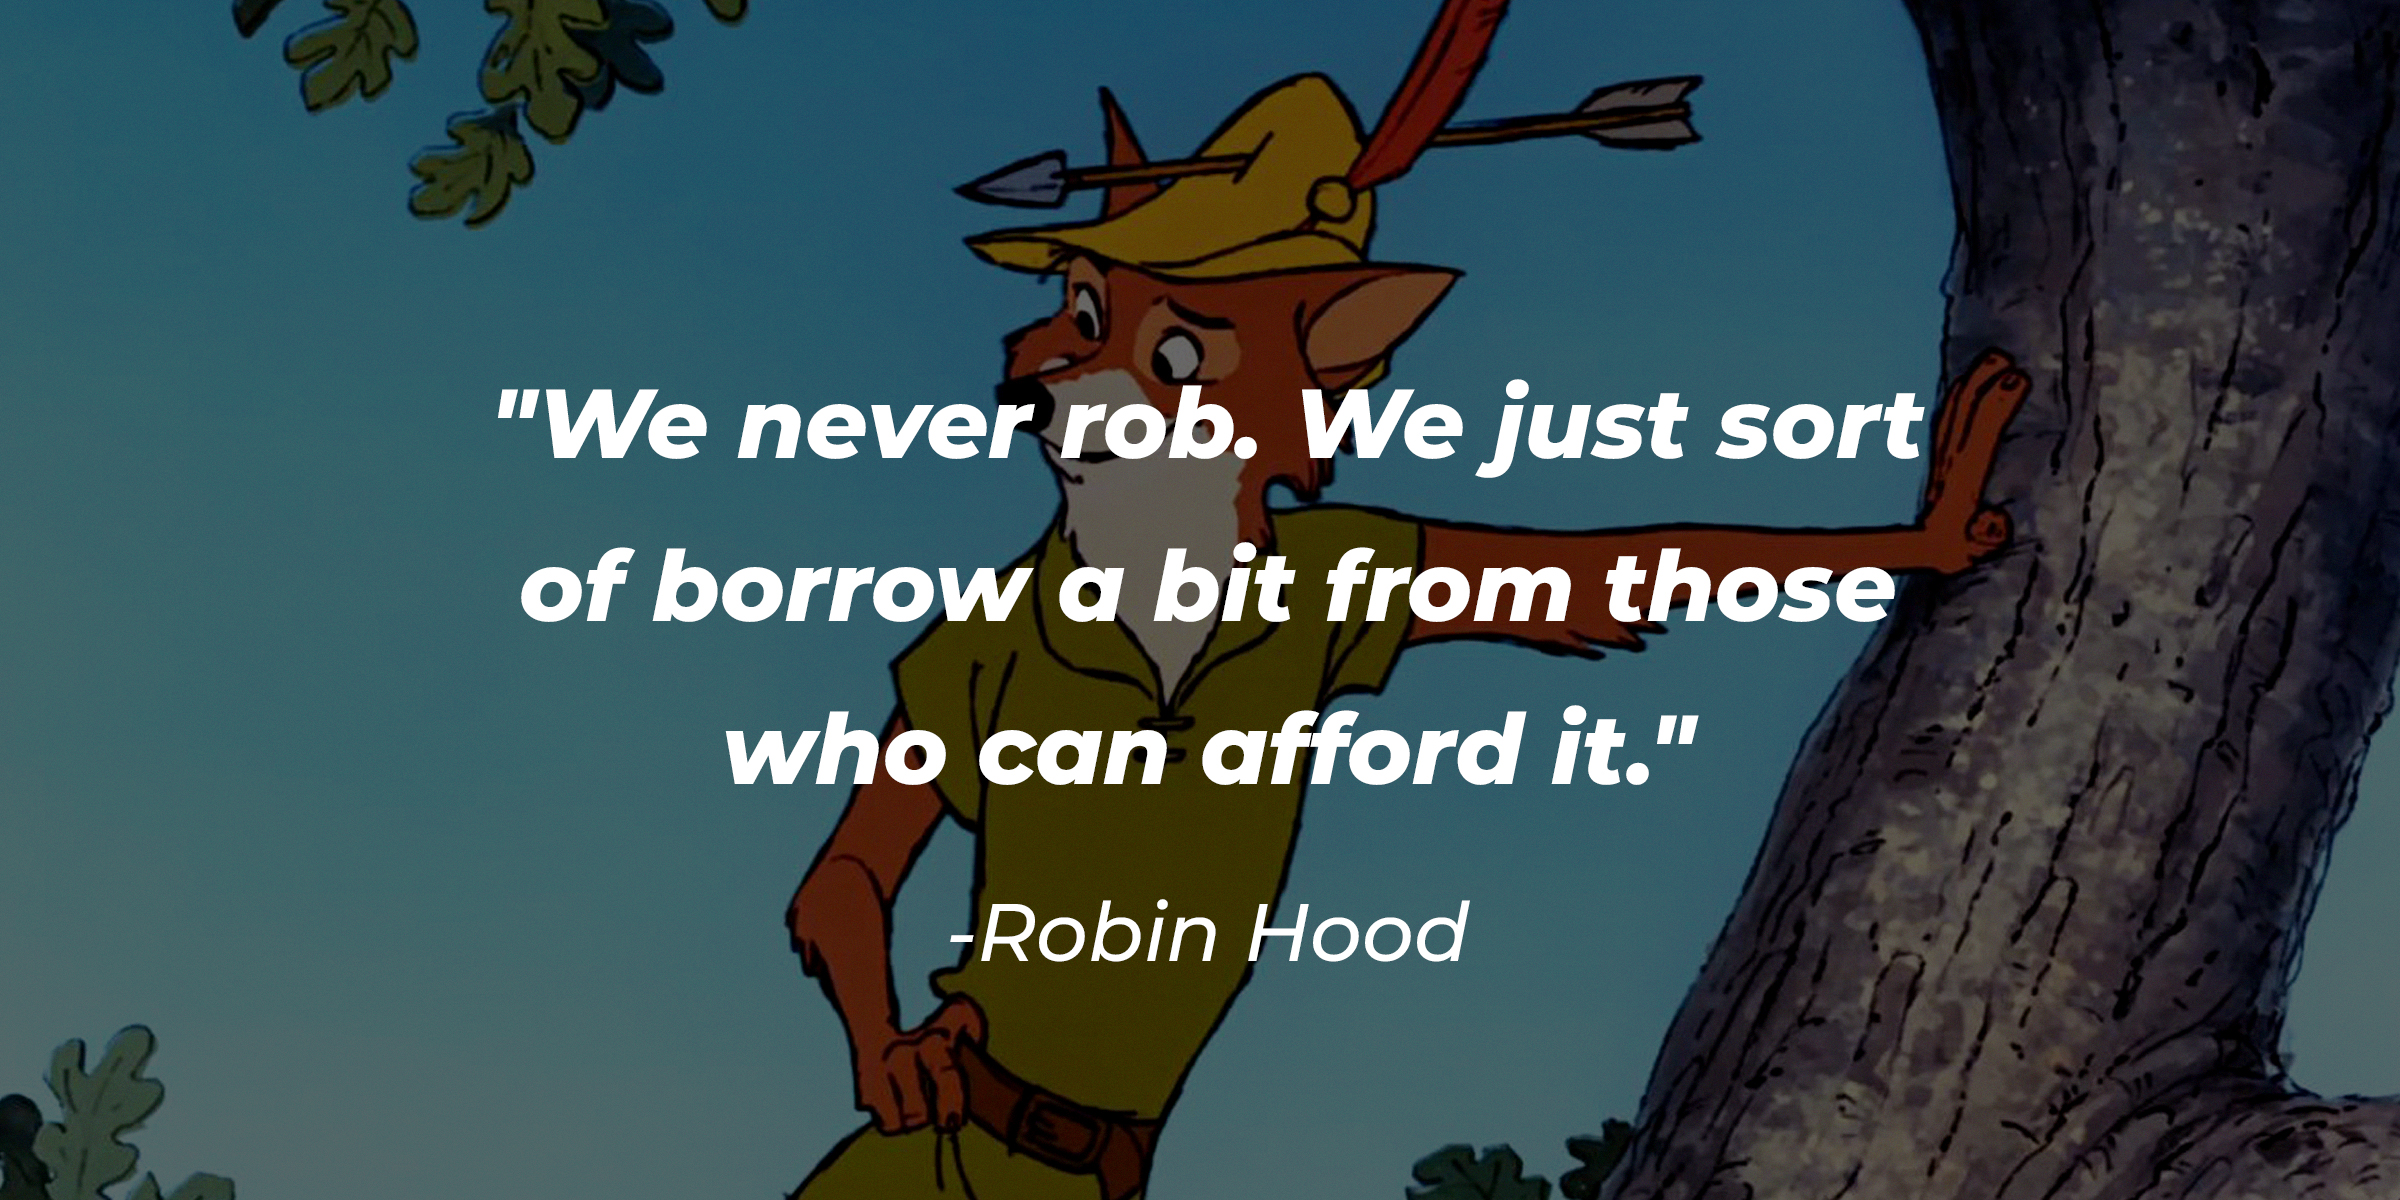 An image of Robin Hood with his quote: "We never rob. We just sort of borrow a bit from those who can afford it." | Source: Facebook.com/DisneyRobinHood